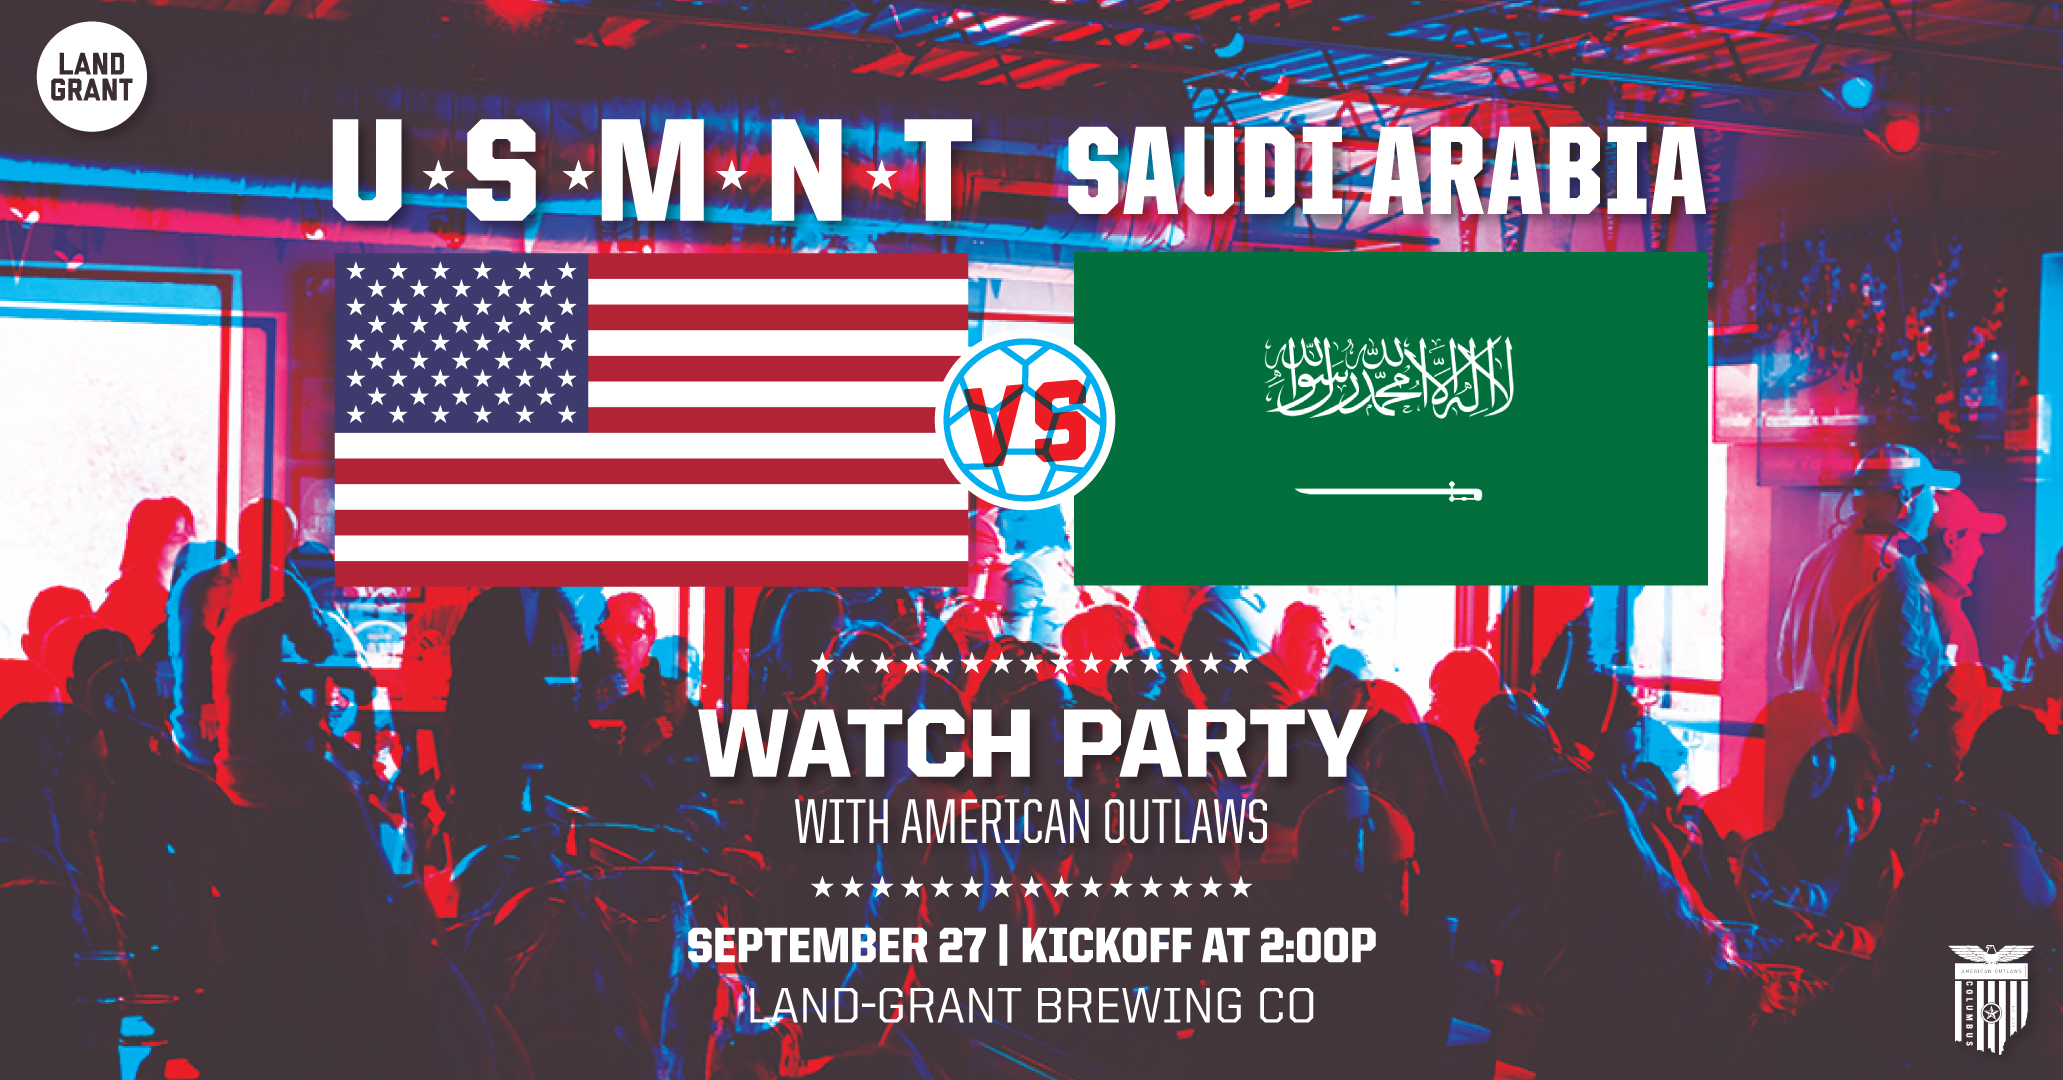 USMNT v Saudi Arabia Friendly Watch Party with AO Land-Grant Brewing Company